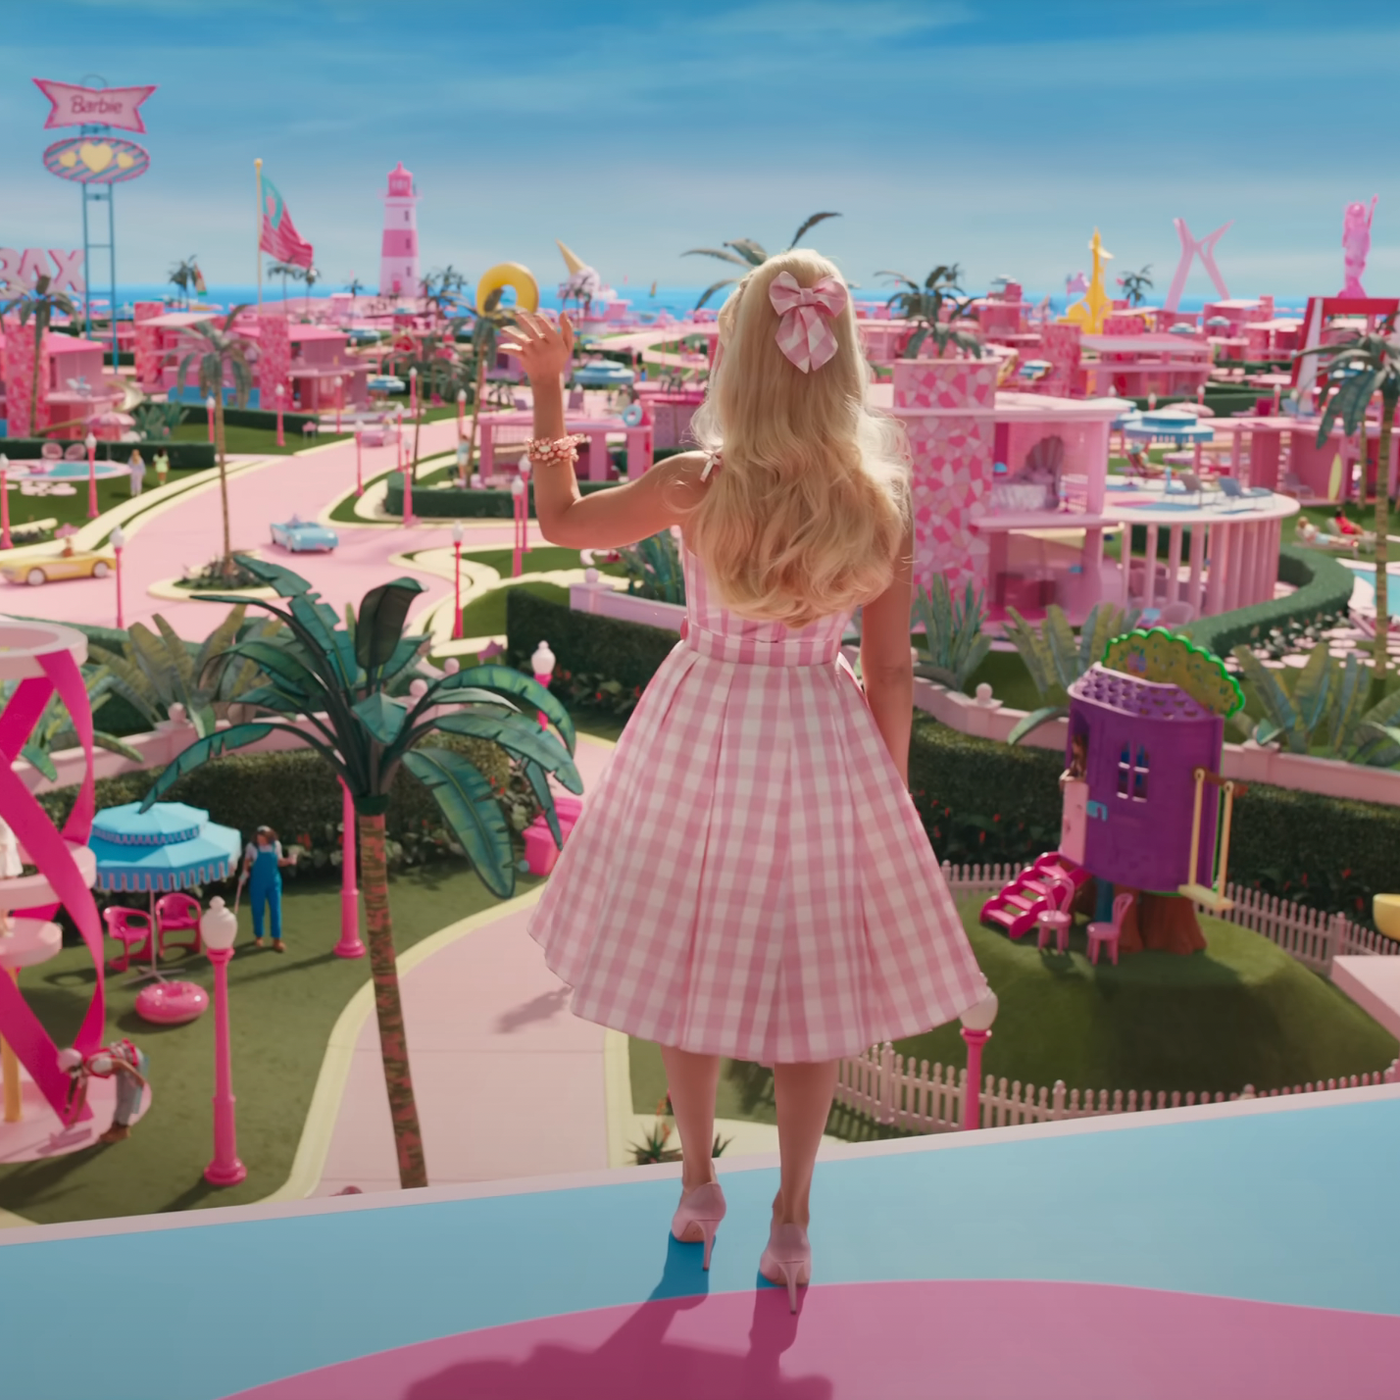 Barbie Movie Set Used so Much Pink Paint It Caused a World Shortage